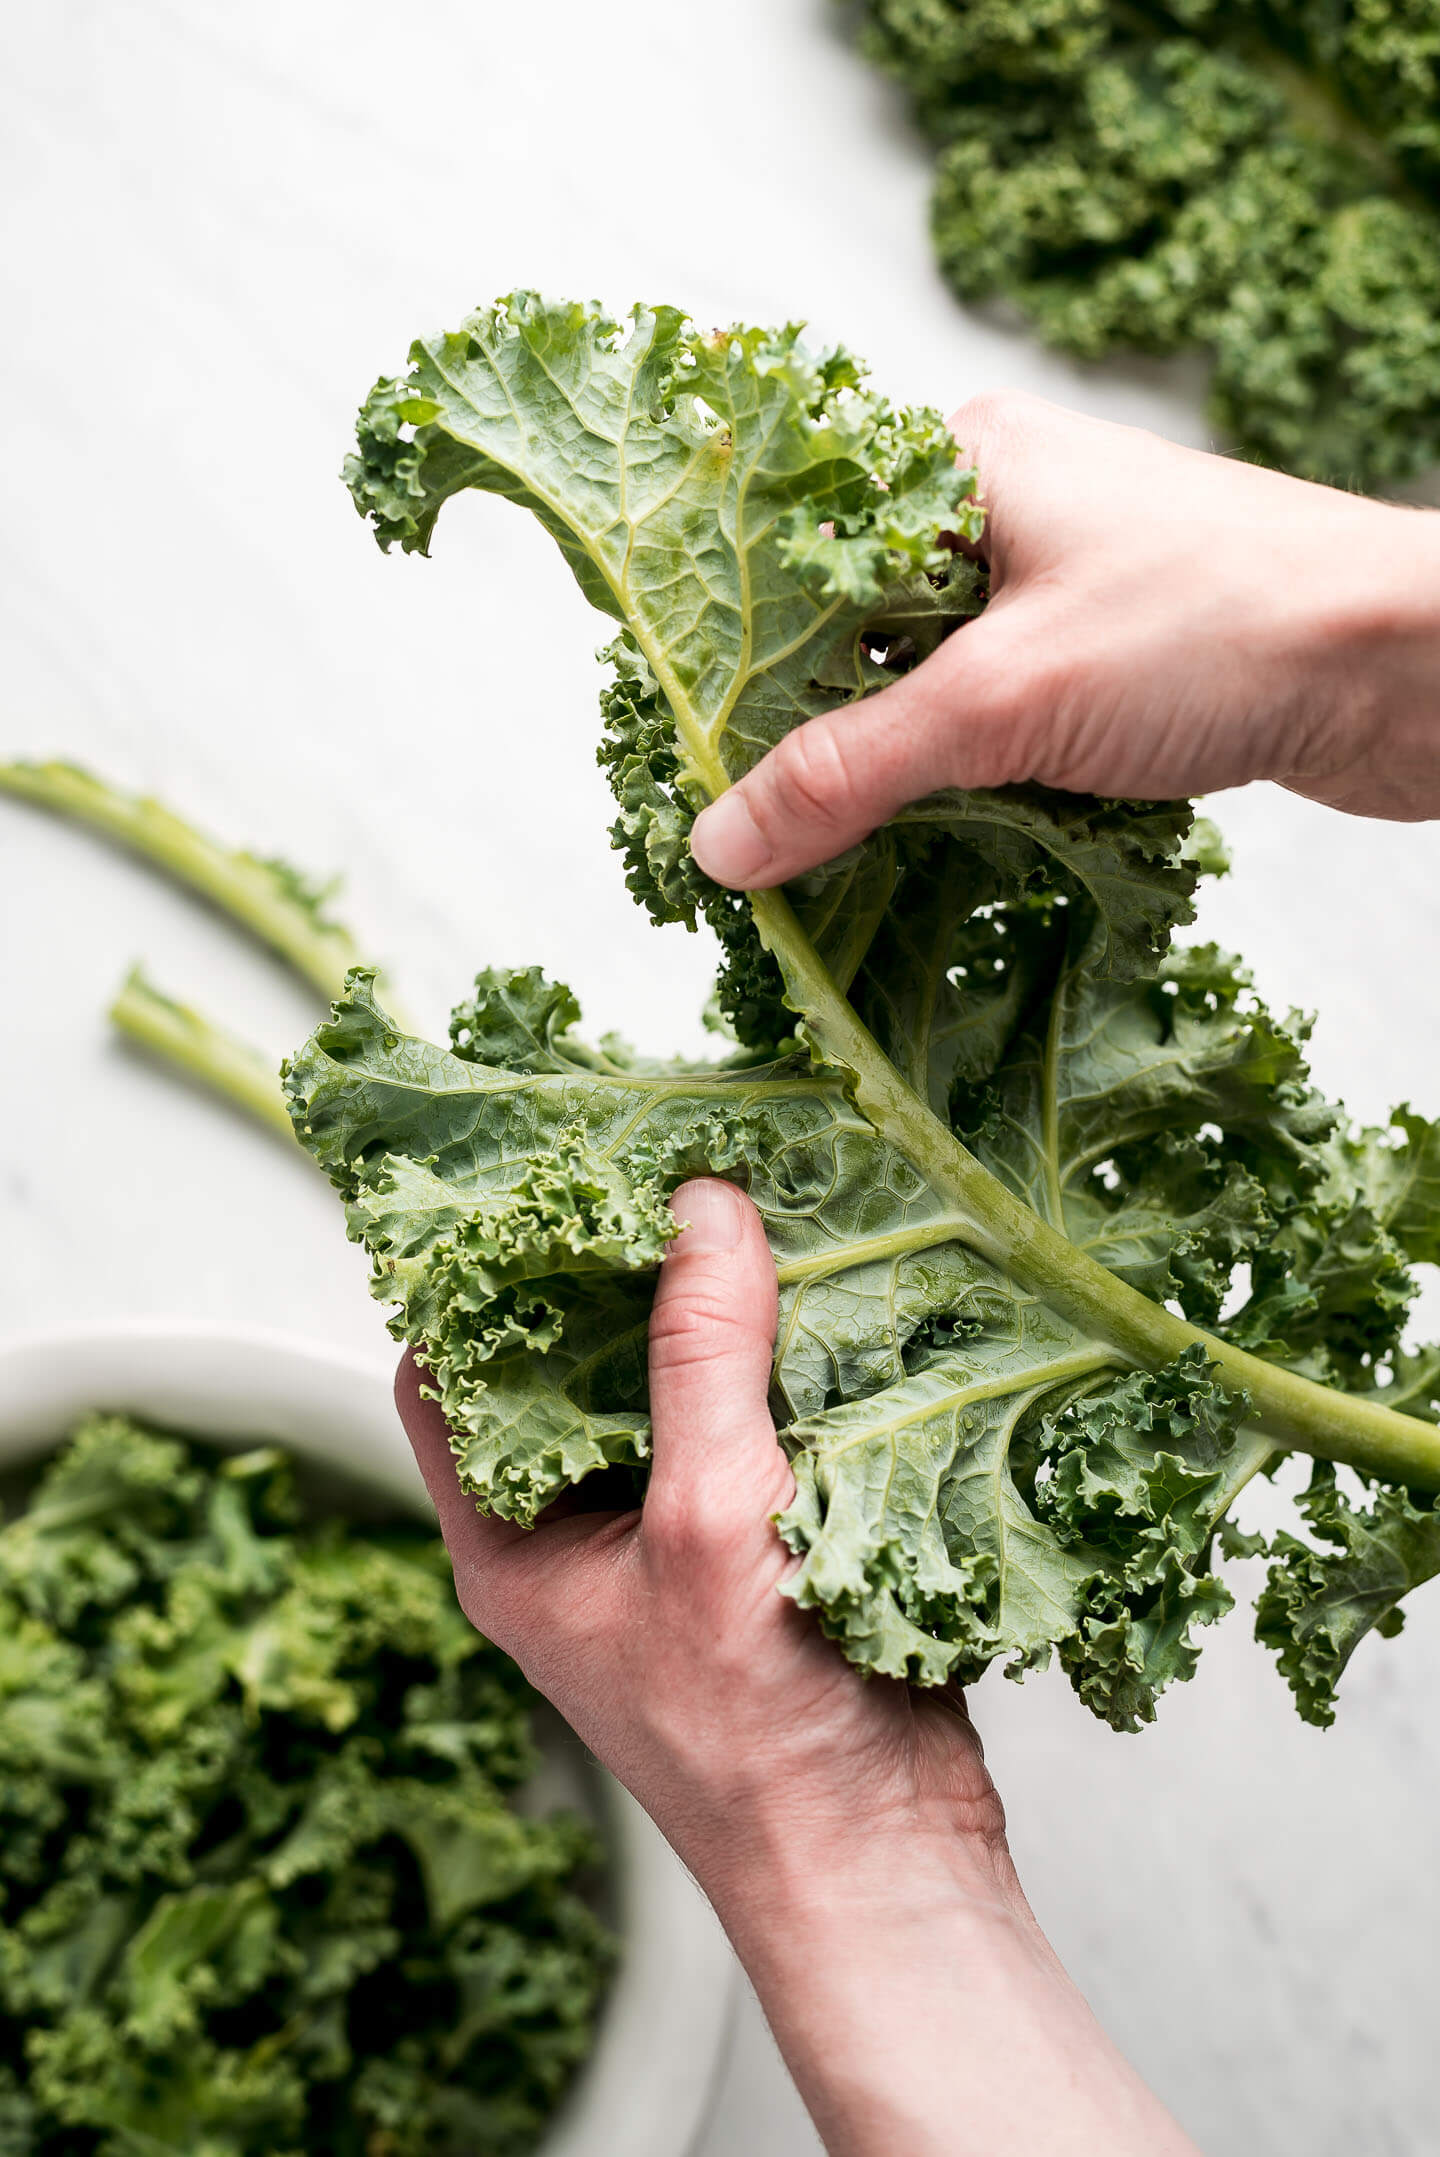 Hands holding a kale leaf and tearing the leafy part off the hard rib.